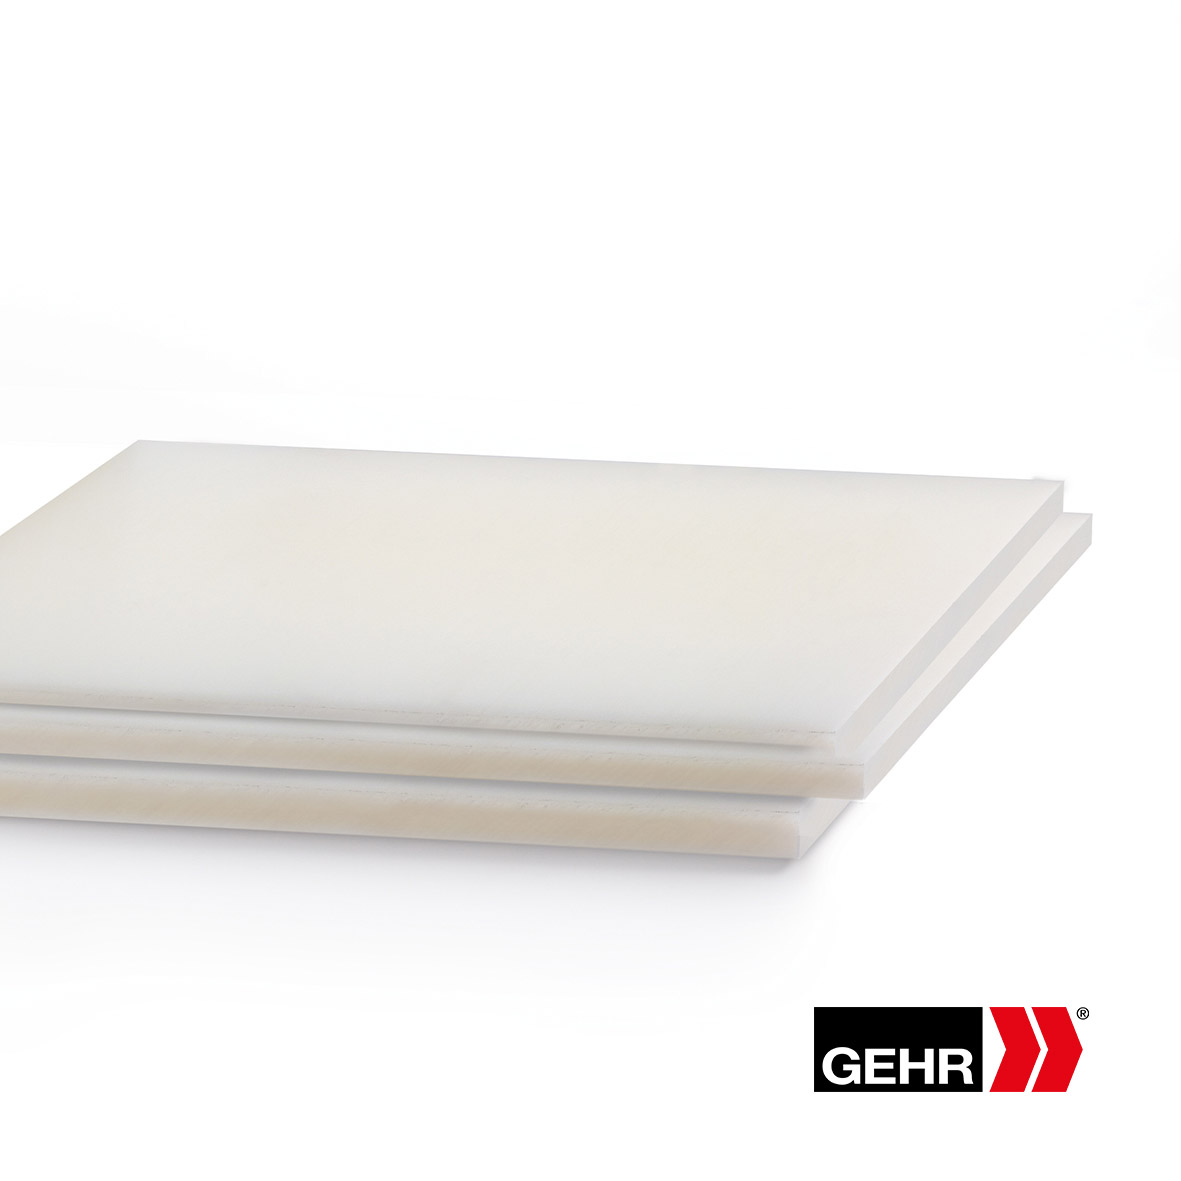 GEHR POM-ESD 9 Sheets 610 x 25 mm ivory